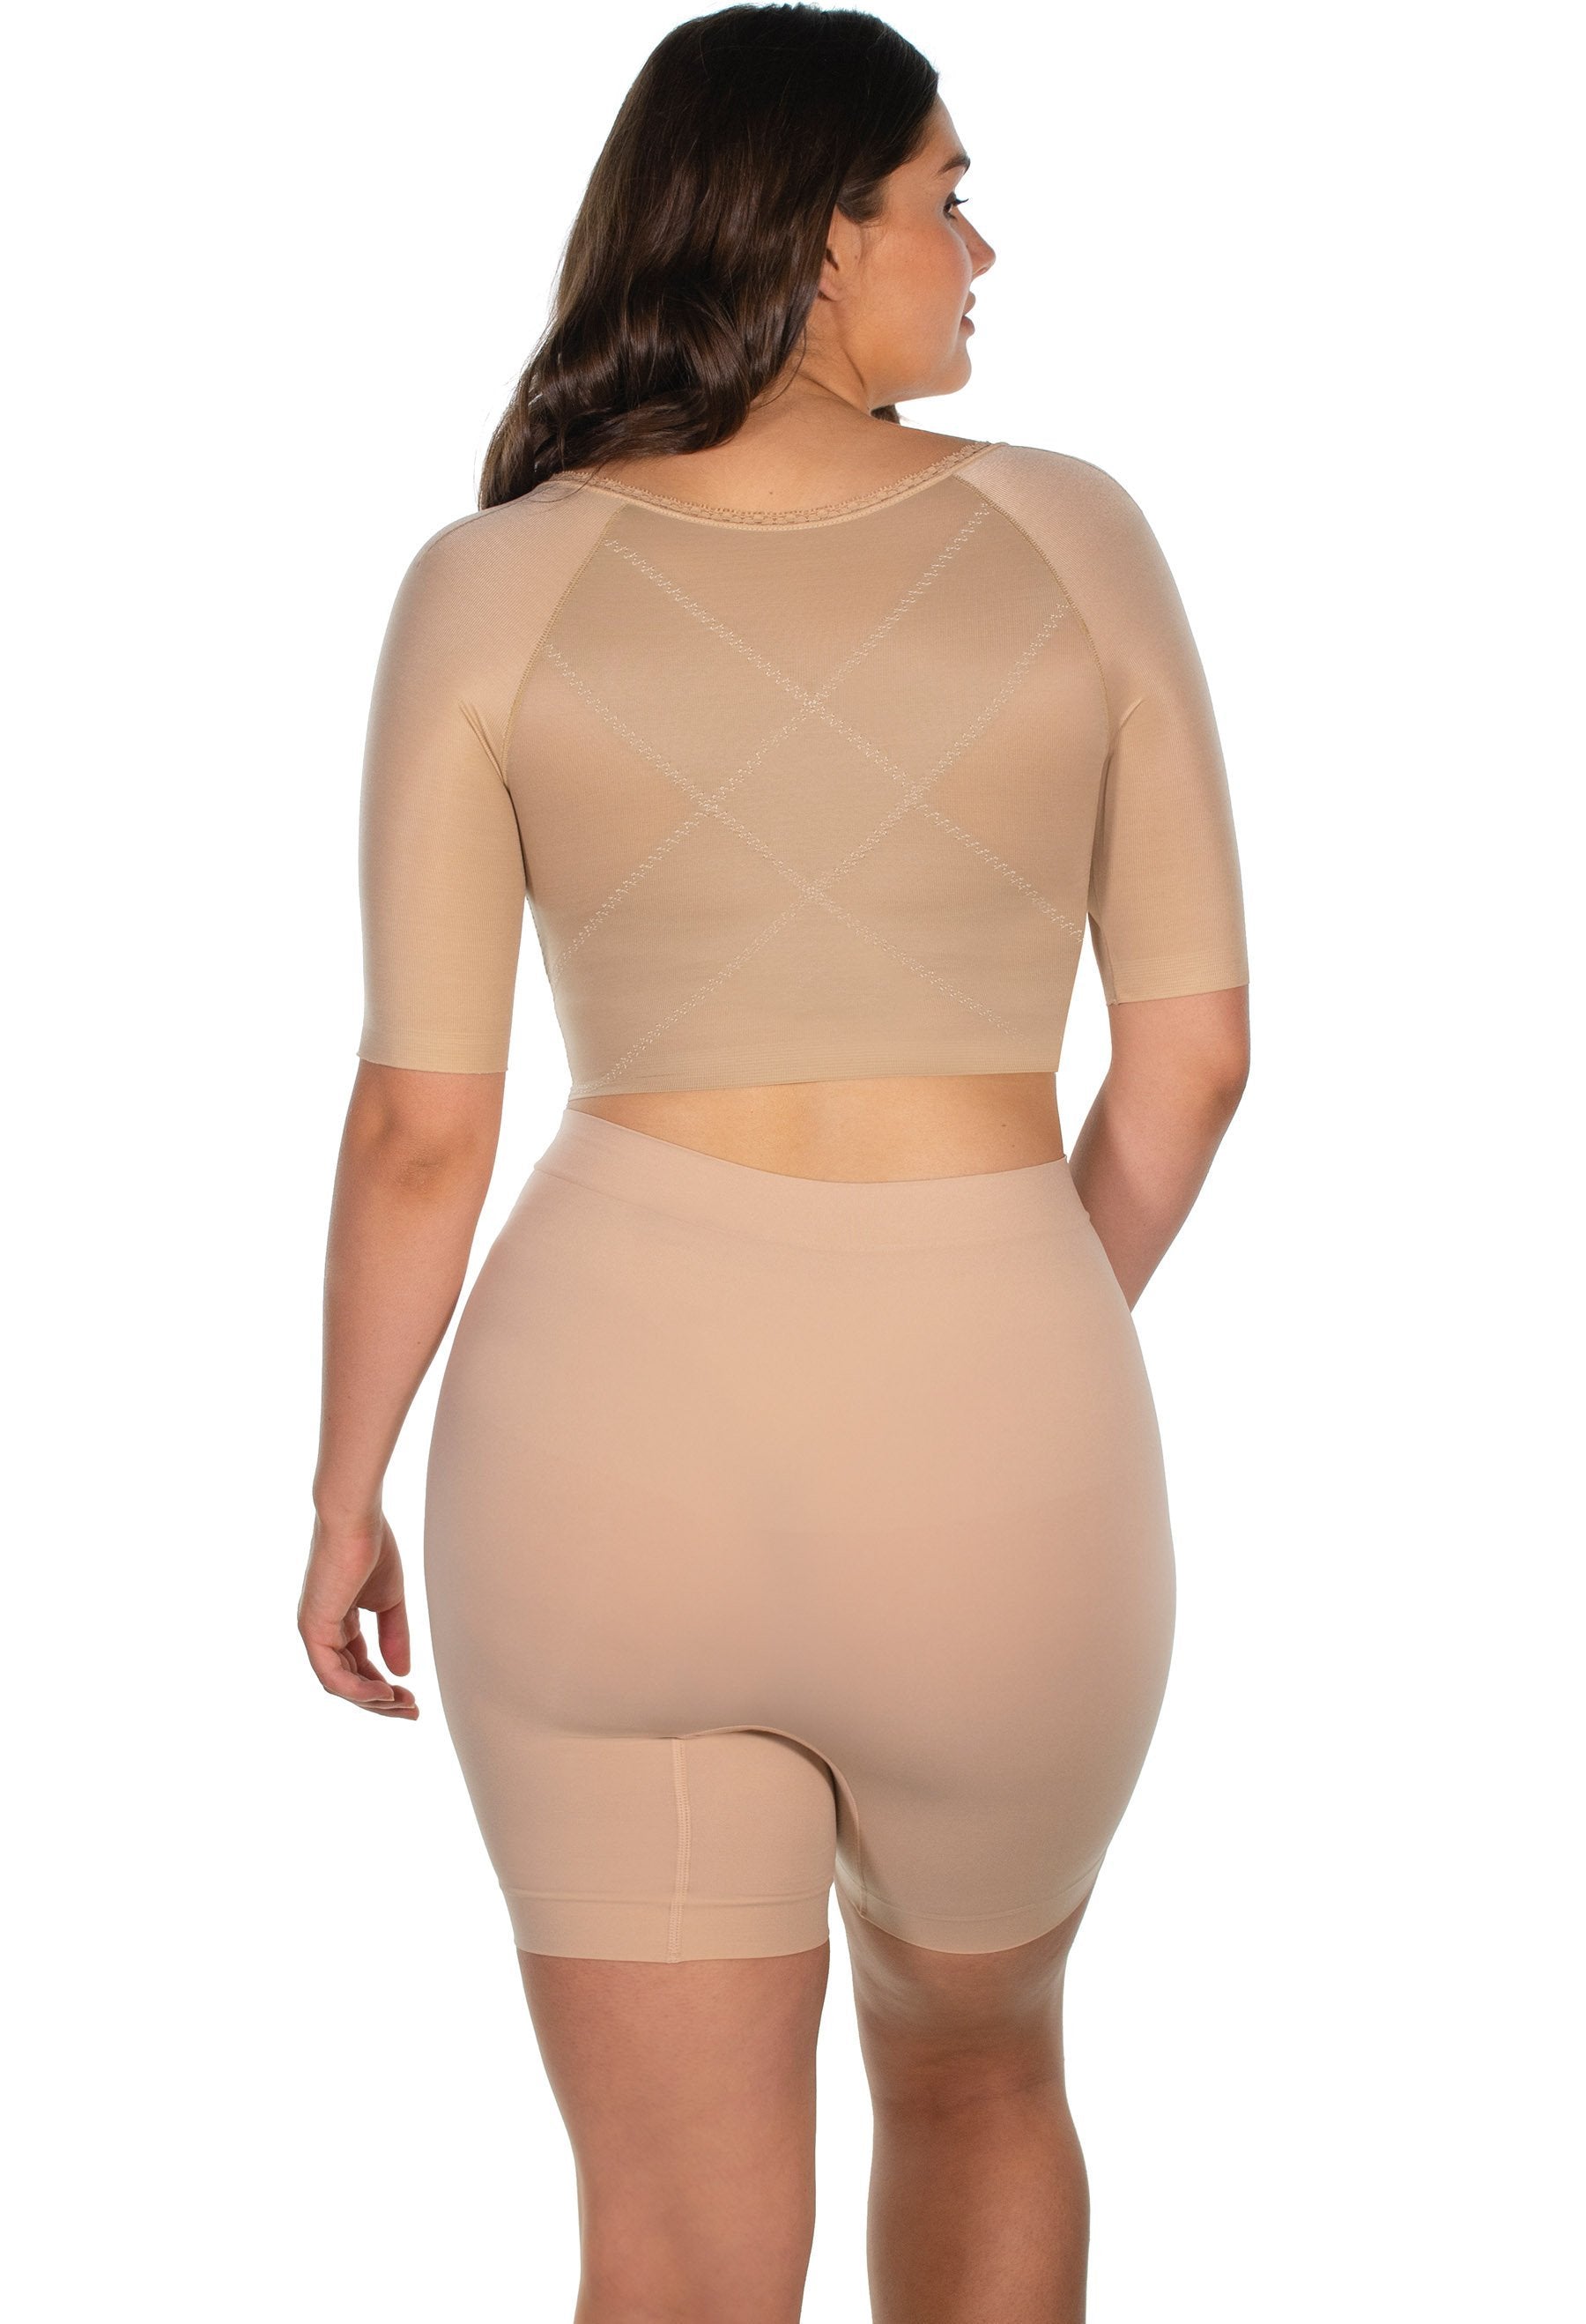 nude shaping garment top smooths upper back invisible under clothing luxurious stretch satin material